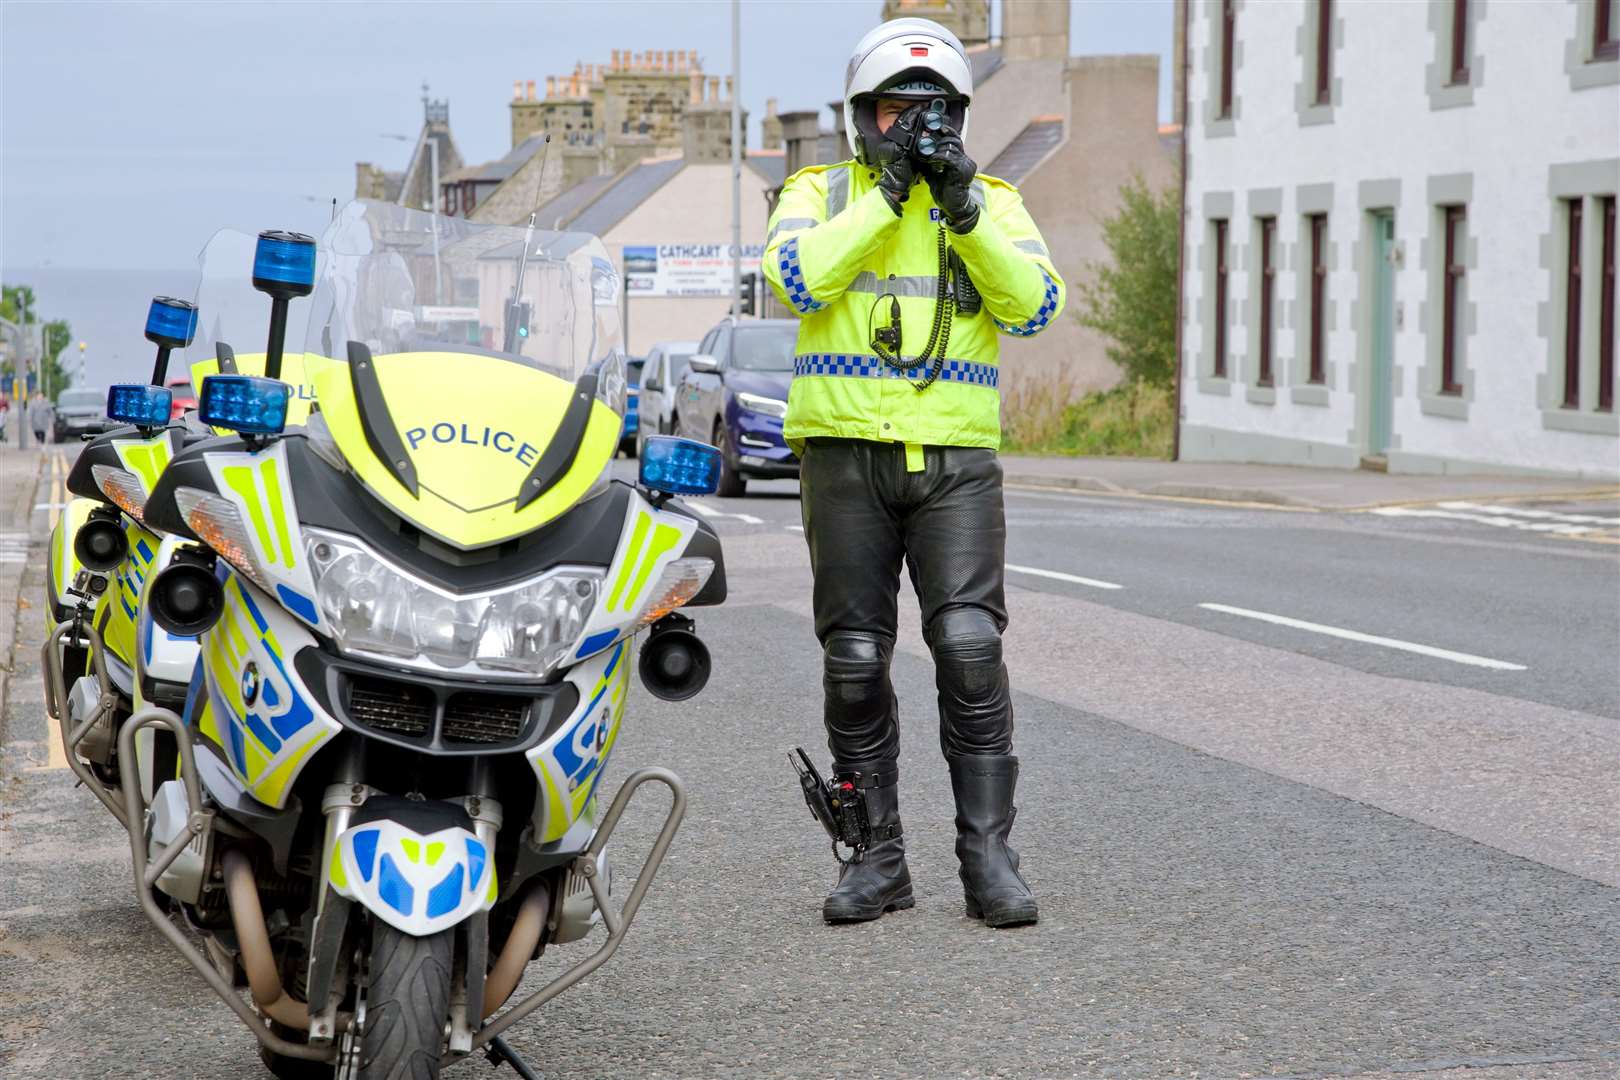 A police motorcyclist carries out a roadside check.